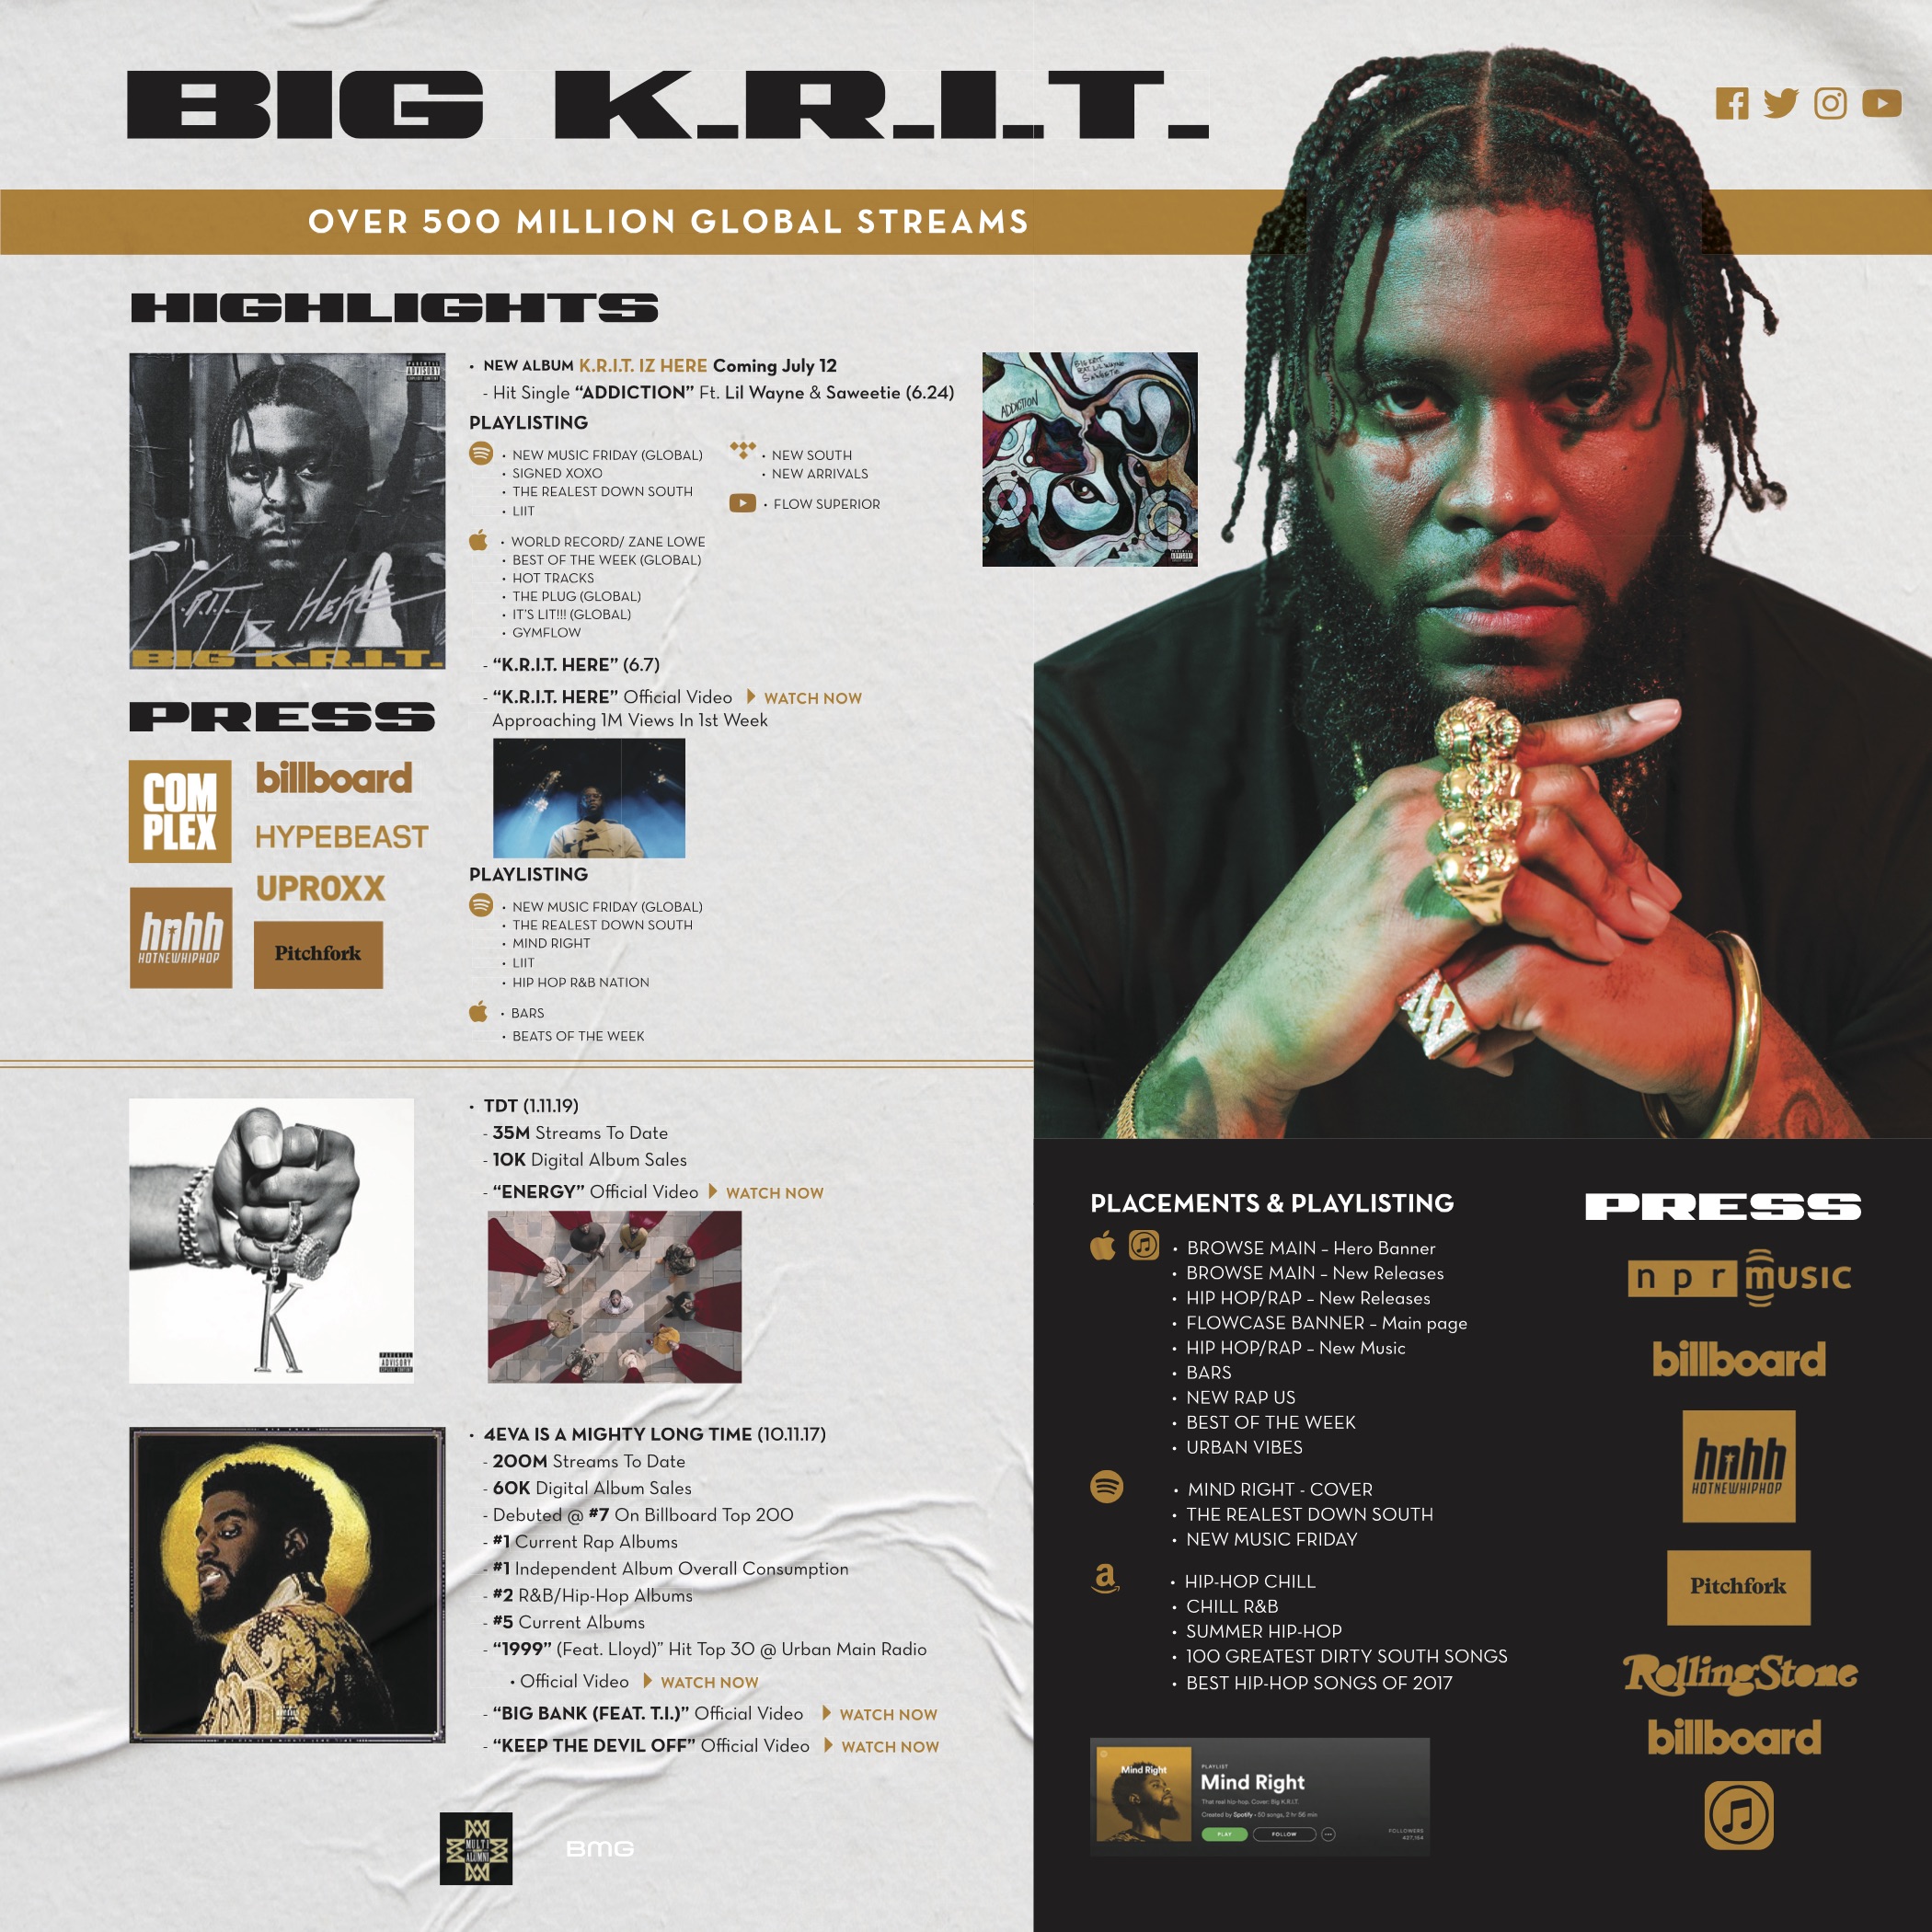 BIG K.R.I.T New Heat for Your Playlist_July 2019